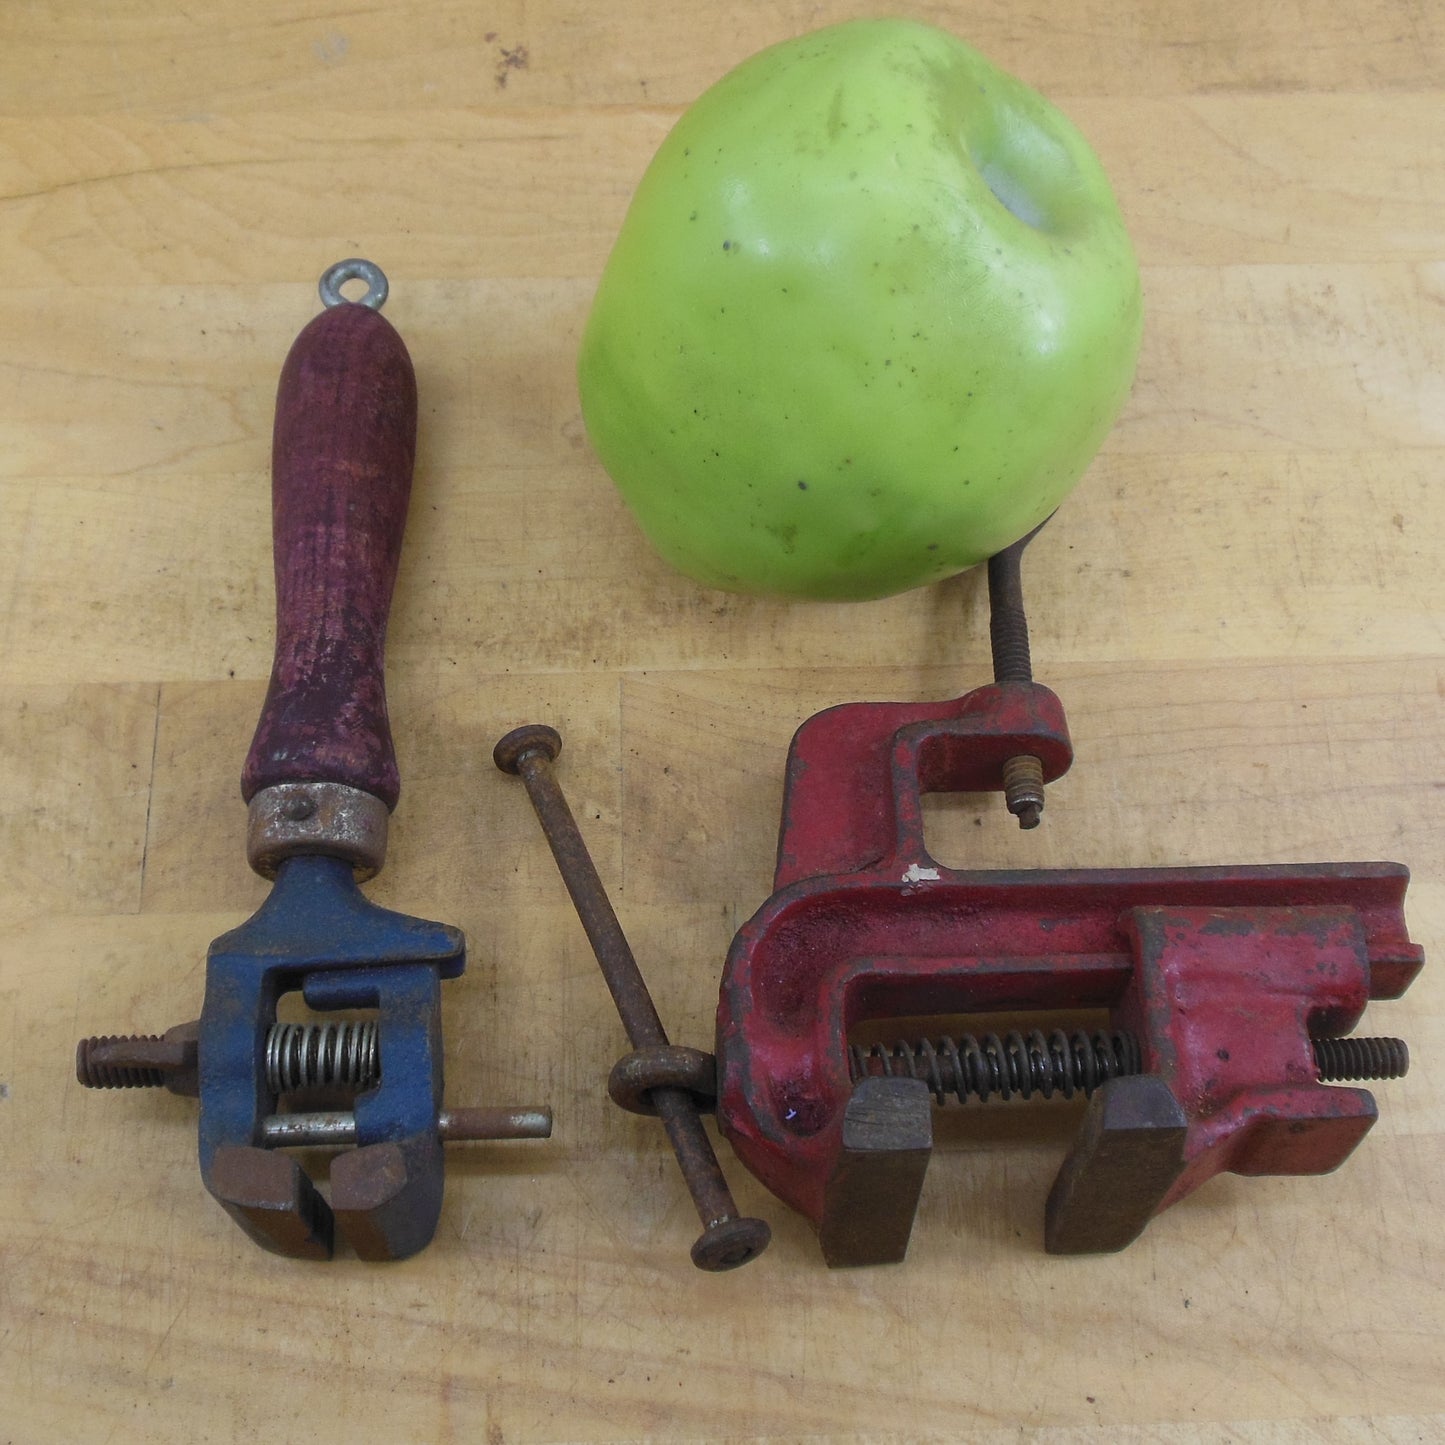 Premier Small Bench Vise 2" & Unbranded Hand Vise 1.25" used